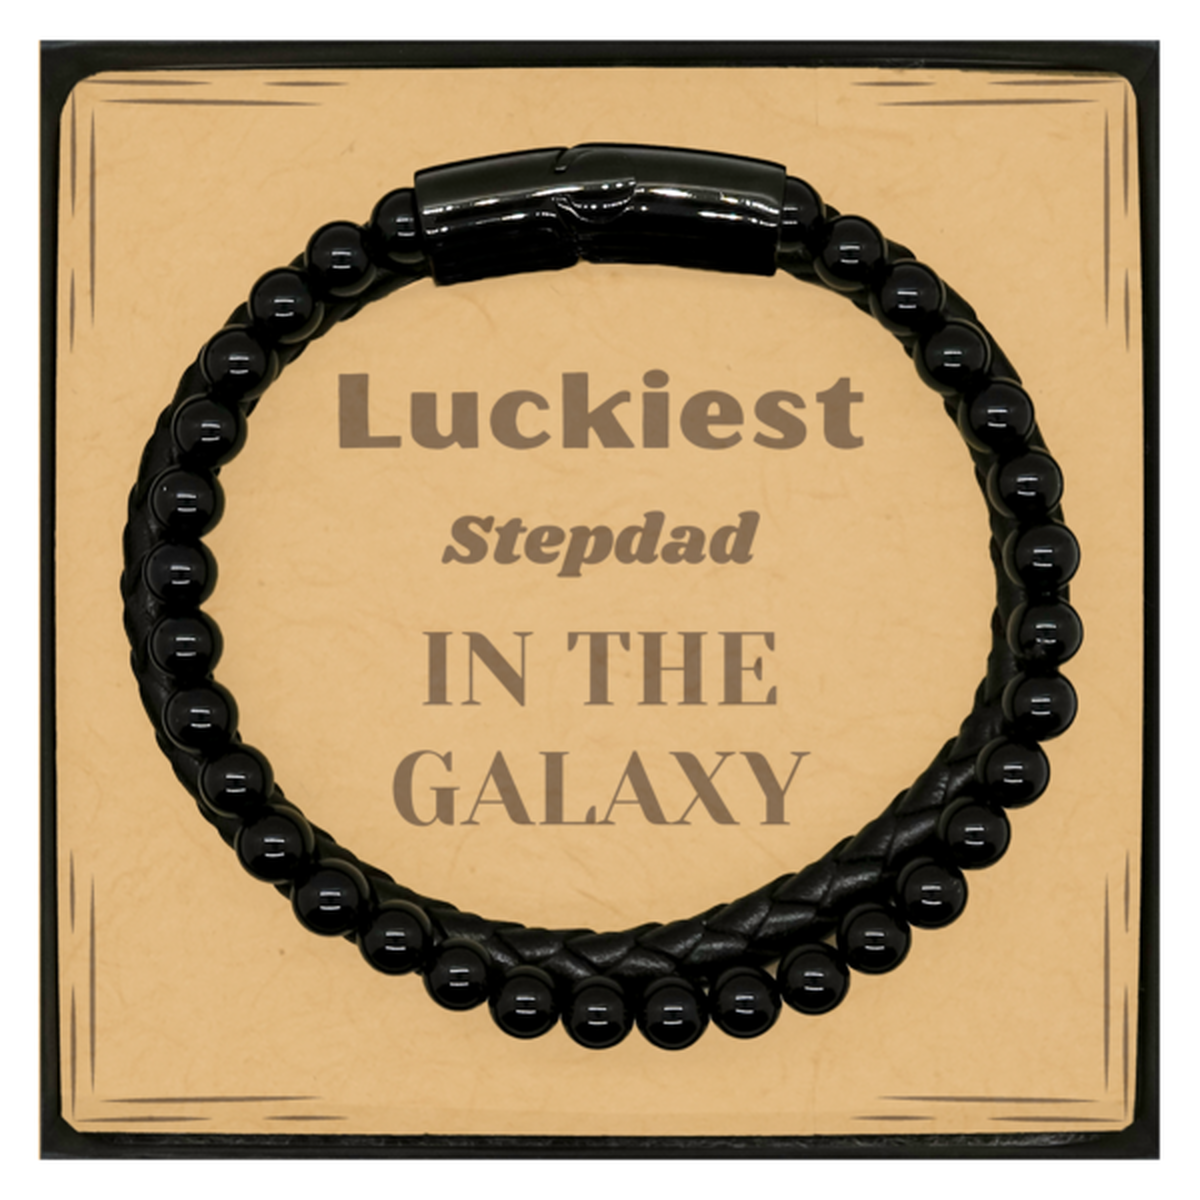 Luckiest Stepdad in the Galaxy, To My Stepdad Message Card Gifts, Christmas Stepdad Stone Leather Bracelets Gifts, X-mas Birthday Unique Gifts For Stepdad Men Women